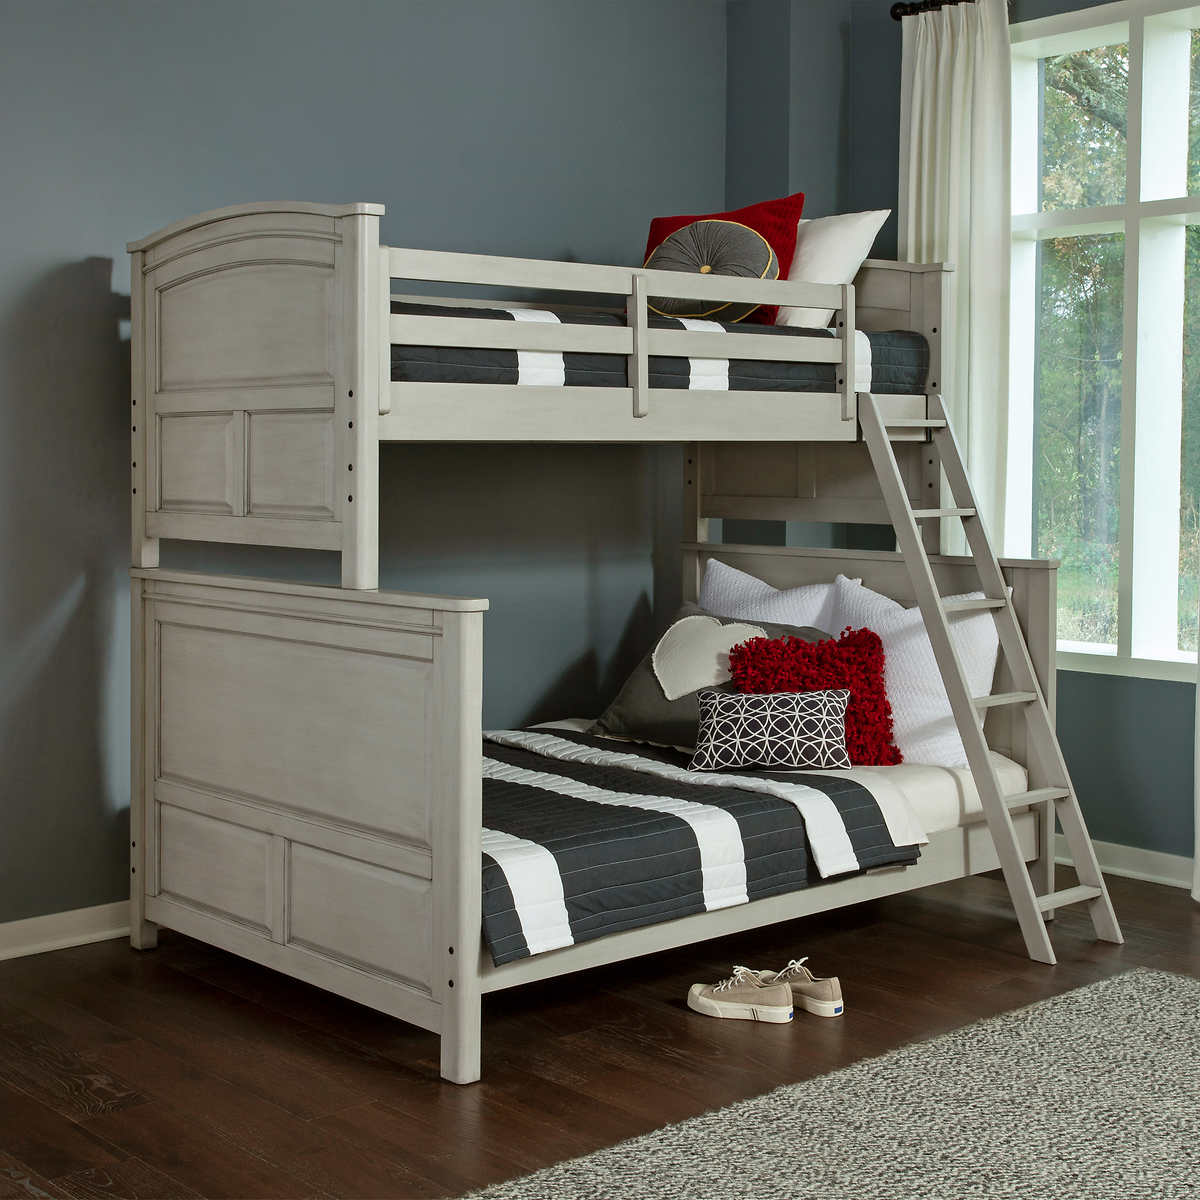 Wingate Twin Over Full Bunk Bed Costco, Gray Bunk Beds Twin Over Twin